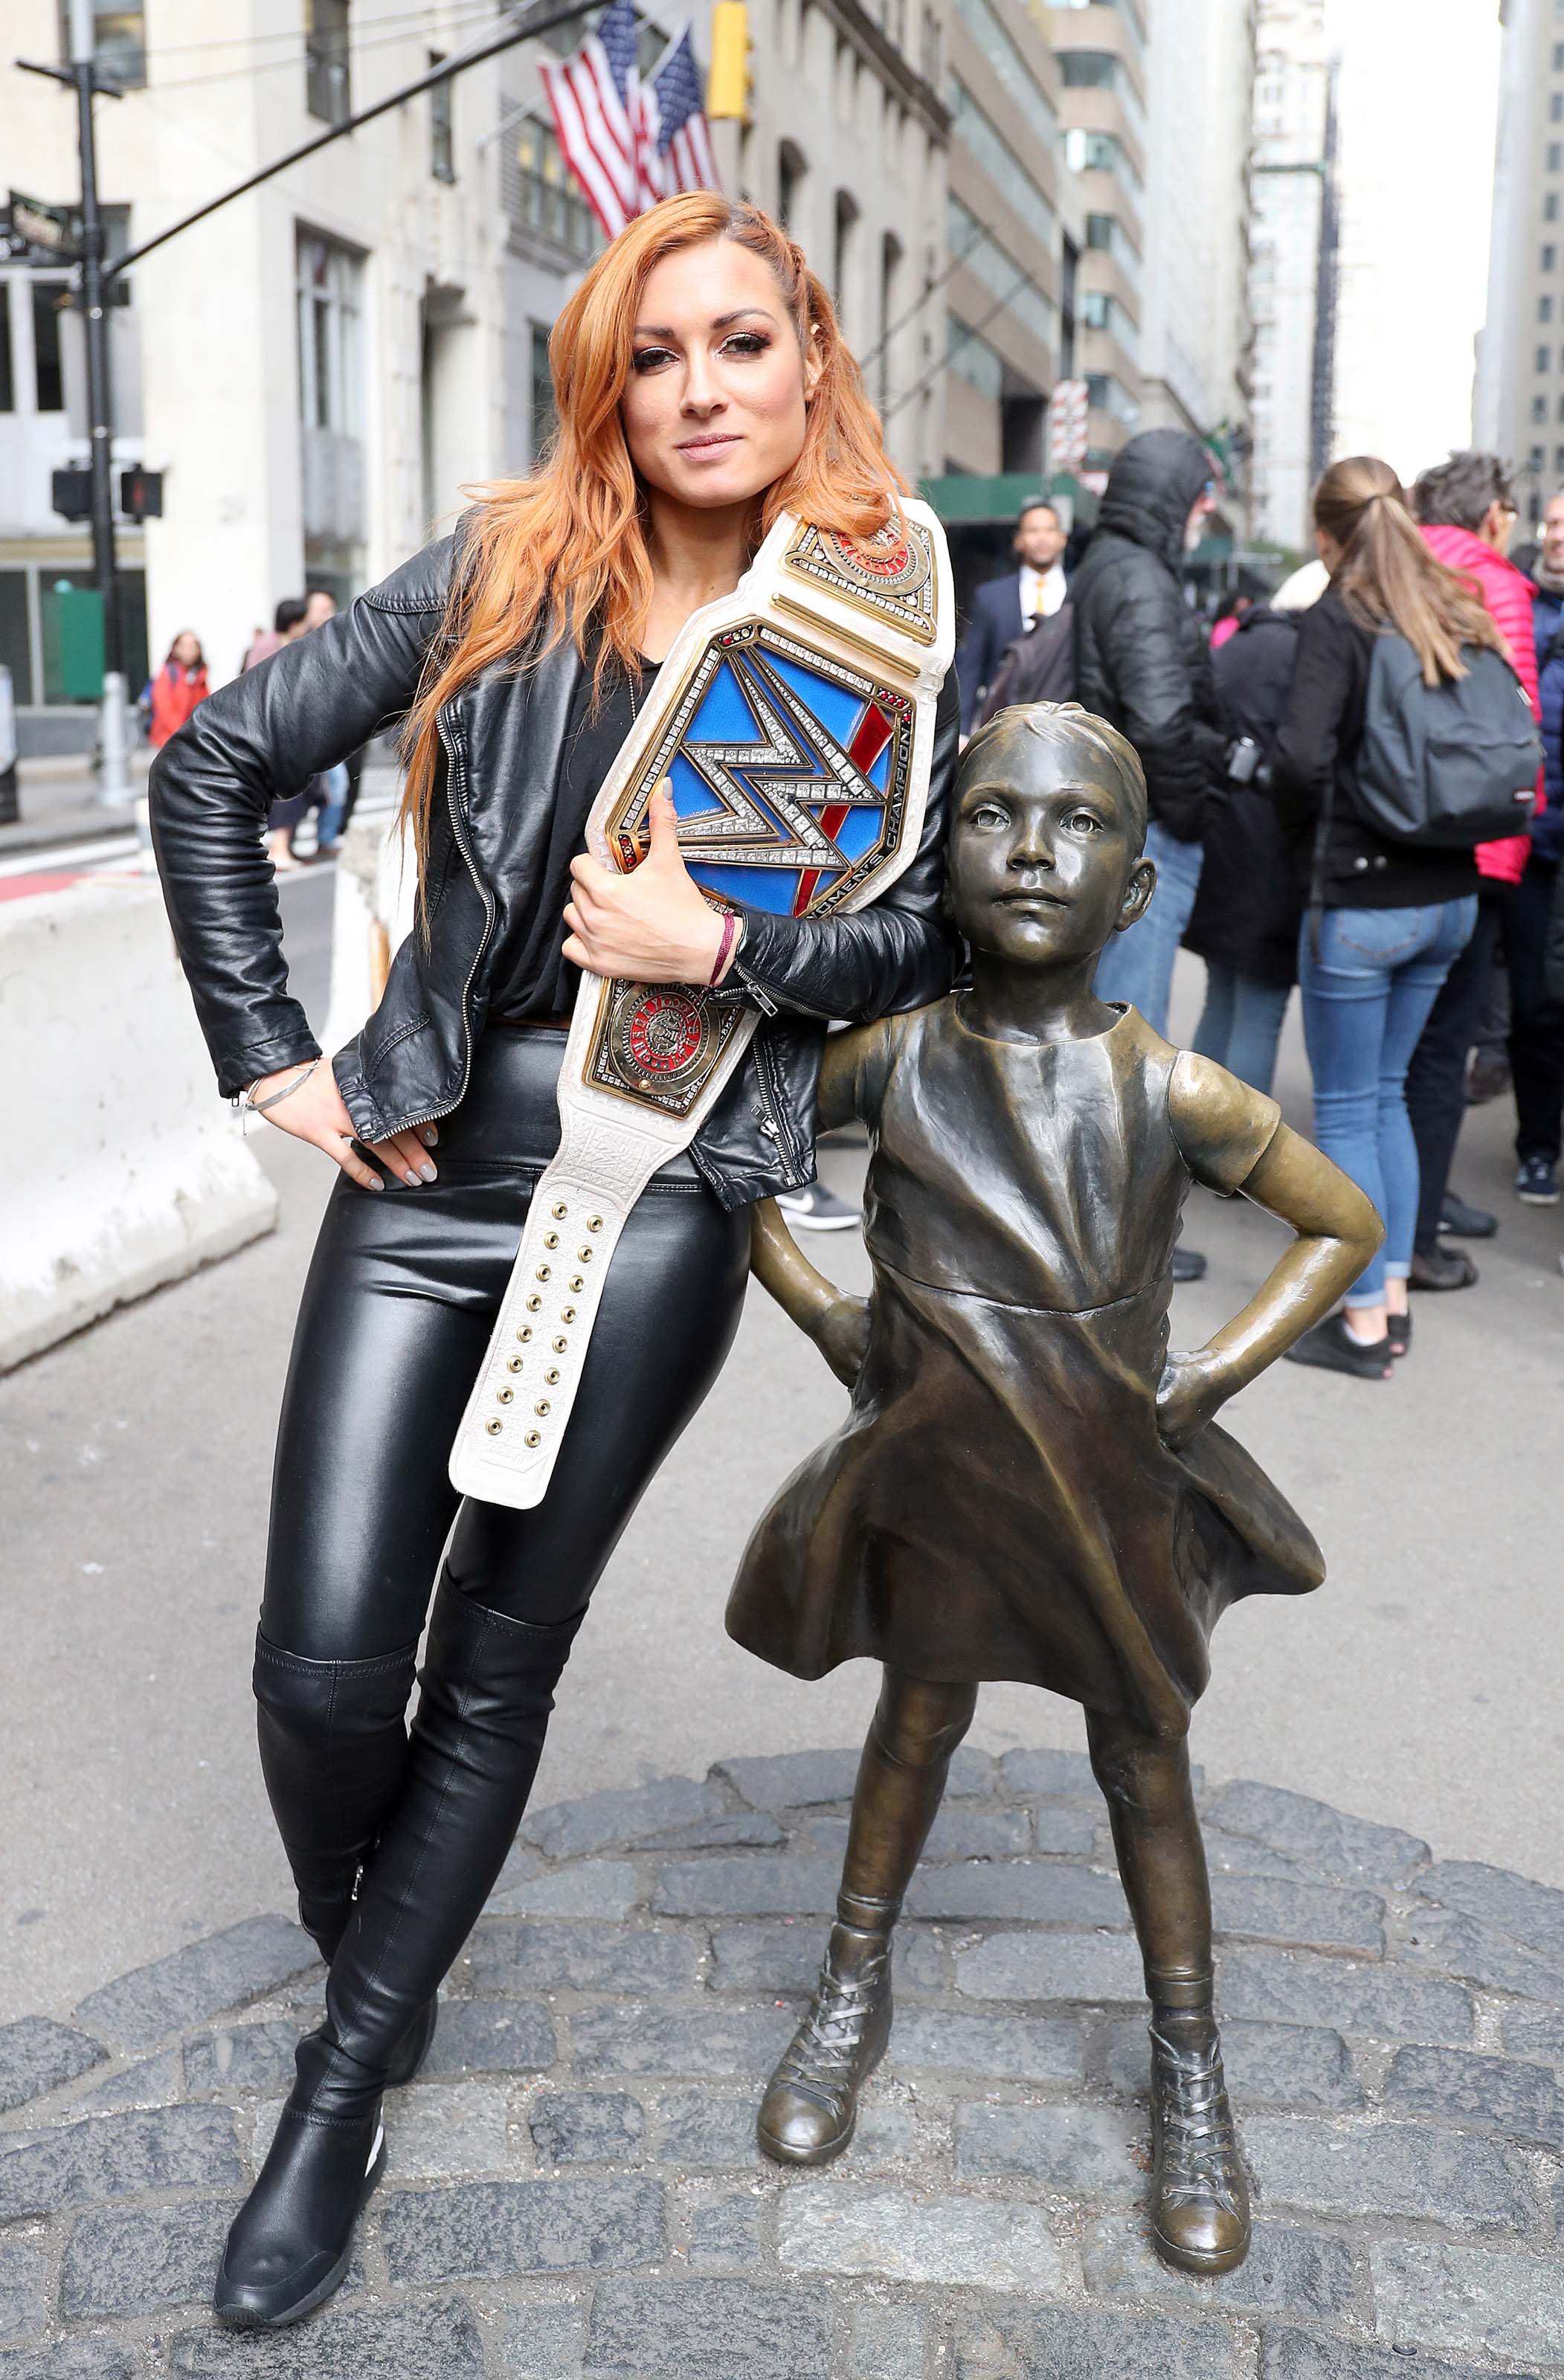 Becky Lynch at Fearless Girl statue in the Wall Street